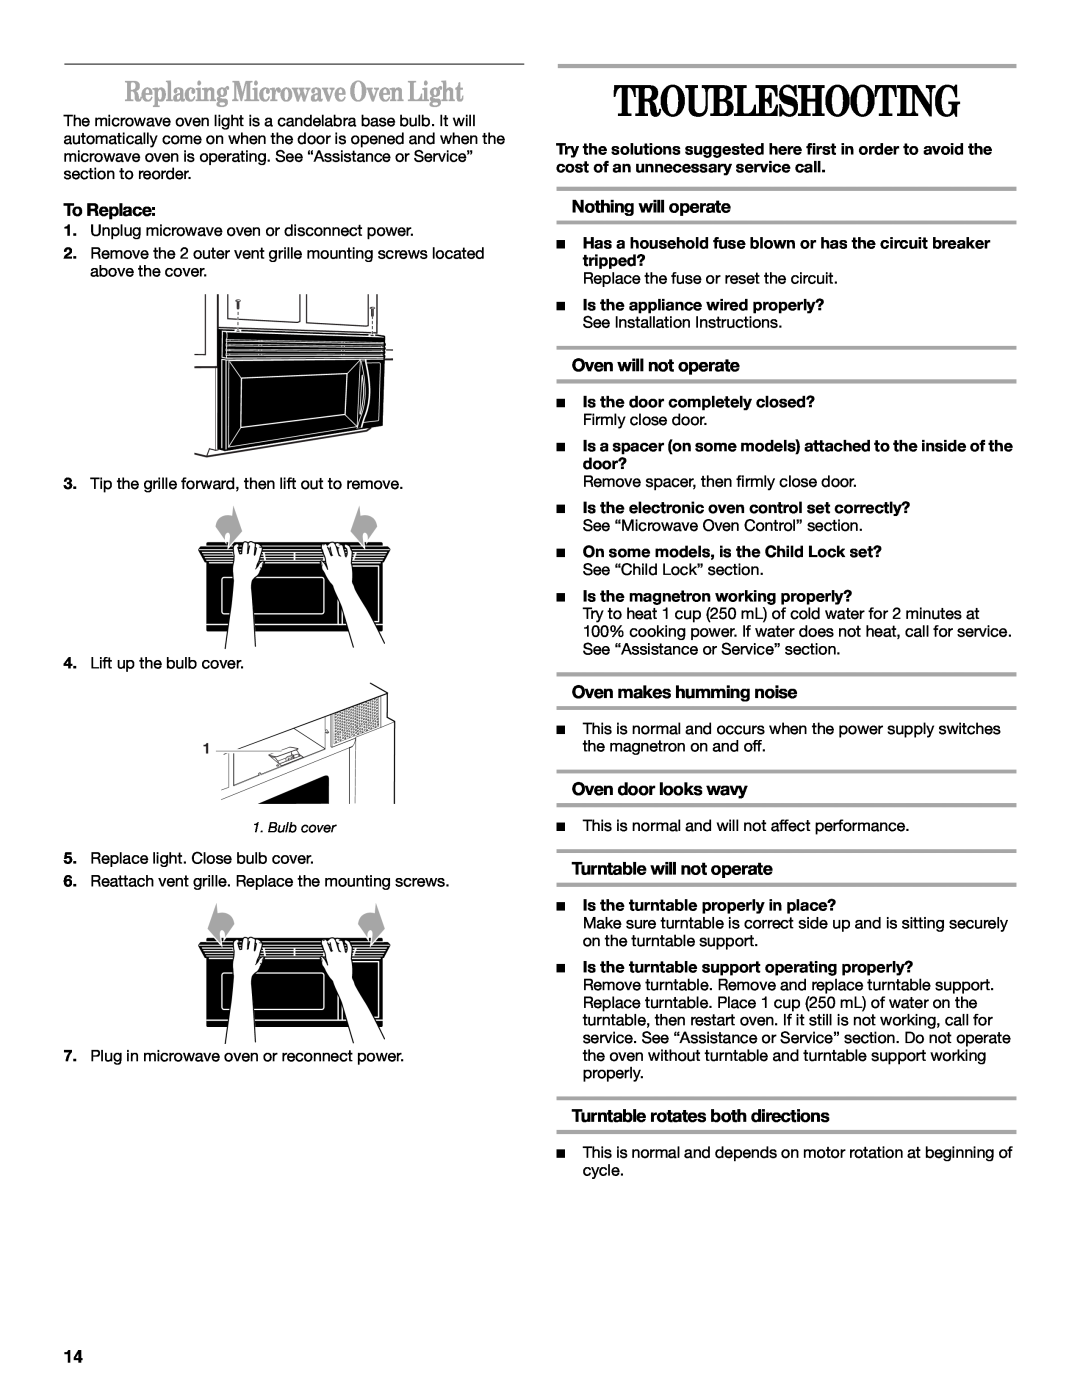 Whirlpool YMH1141XM manual Troubleshooting, Replacing Microwave Oven Light, Nothing will operate, Oven will not operate 